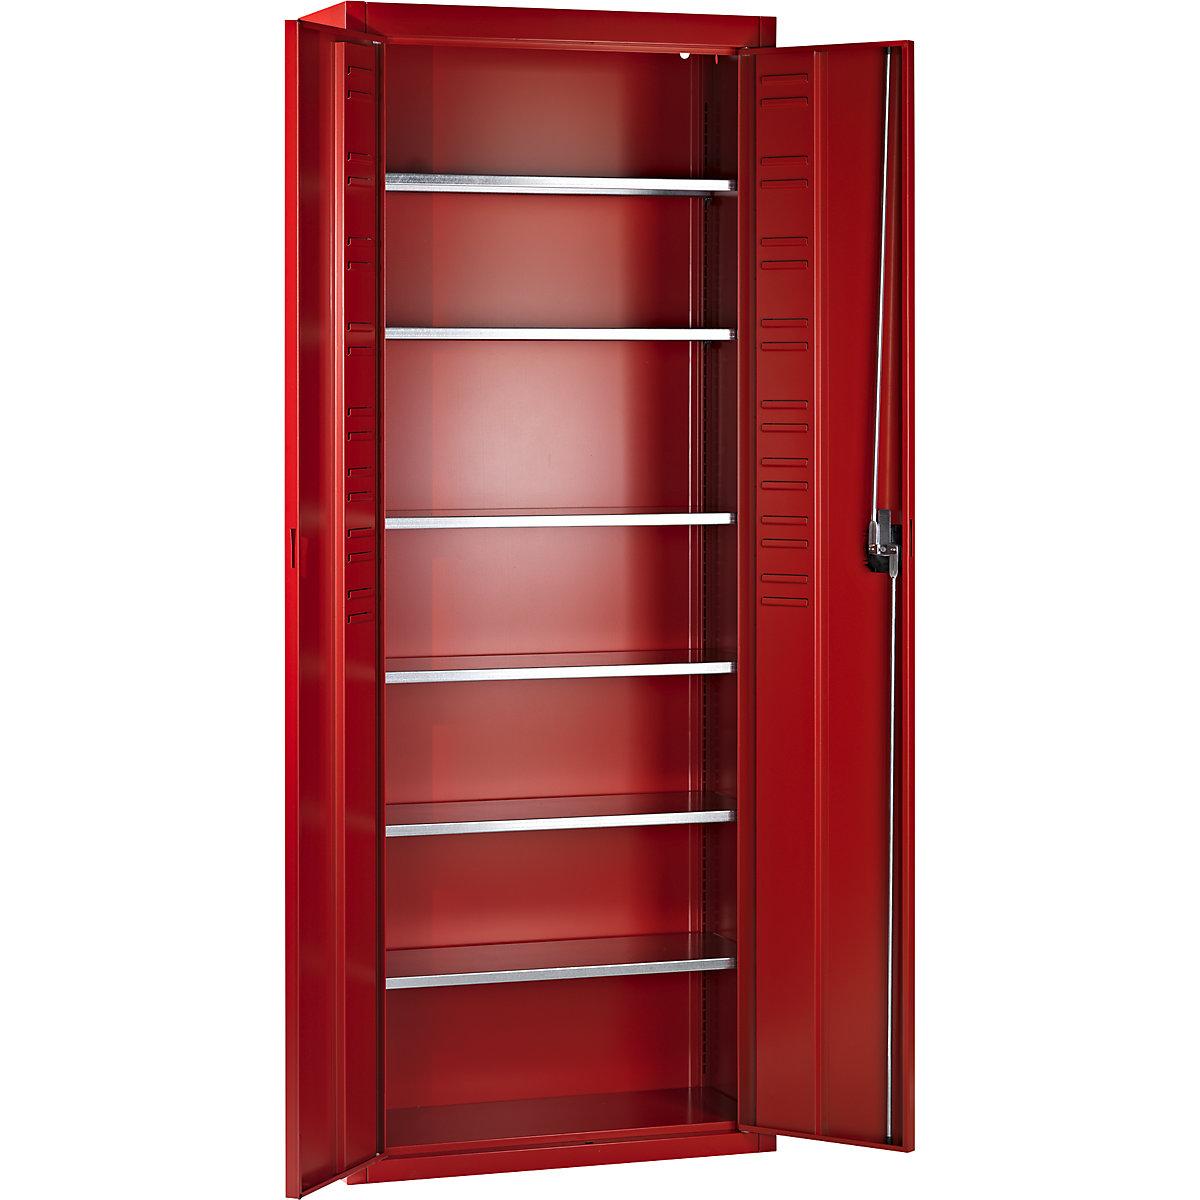 Storage cupboard, without open fronted storage bins – mauser, HxWxD 1740 x 680 x 280 mm, single colour, flame red-8